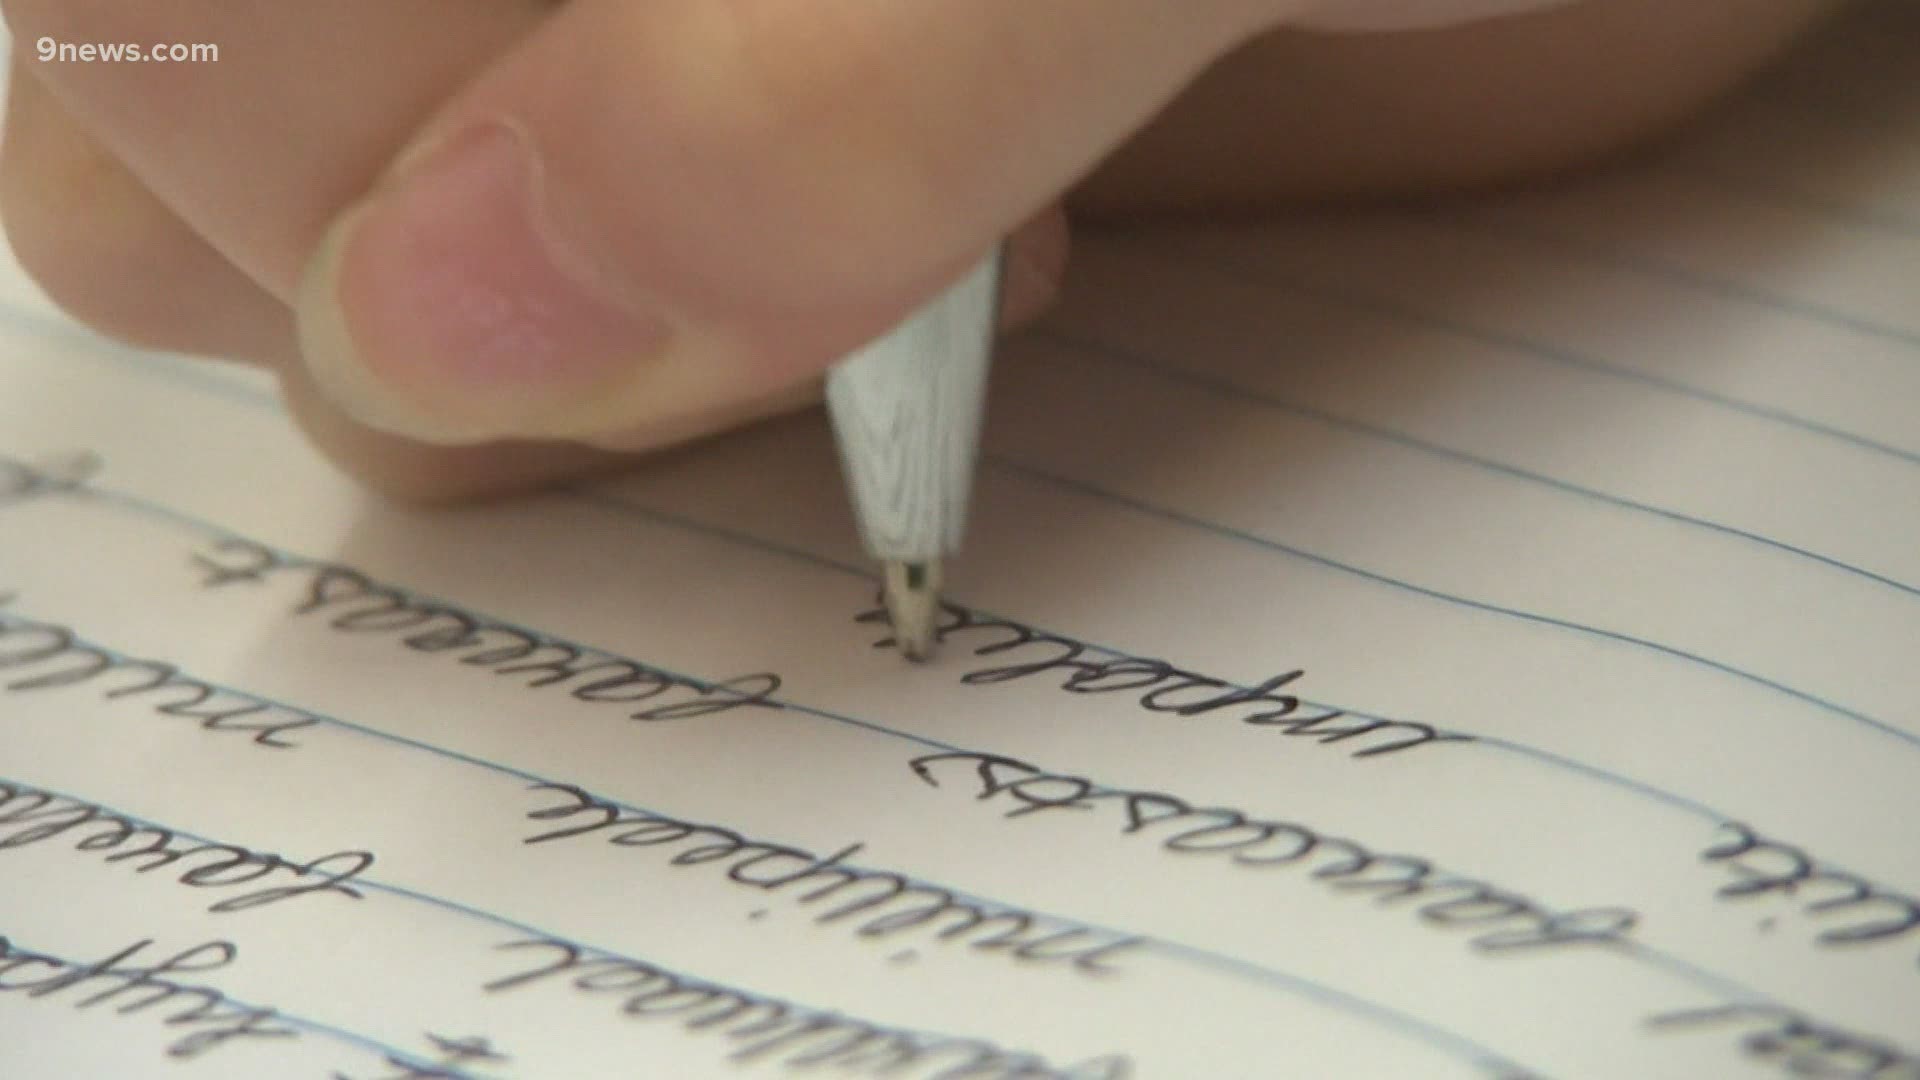 Experts say writing a thank you note helps teach children about gratitude.